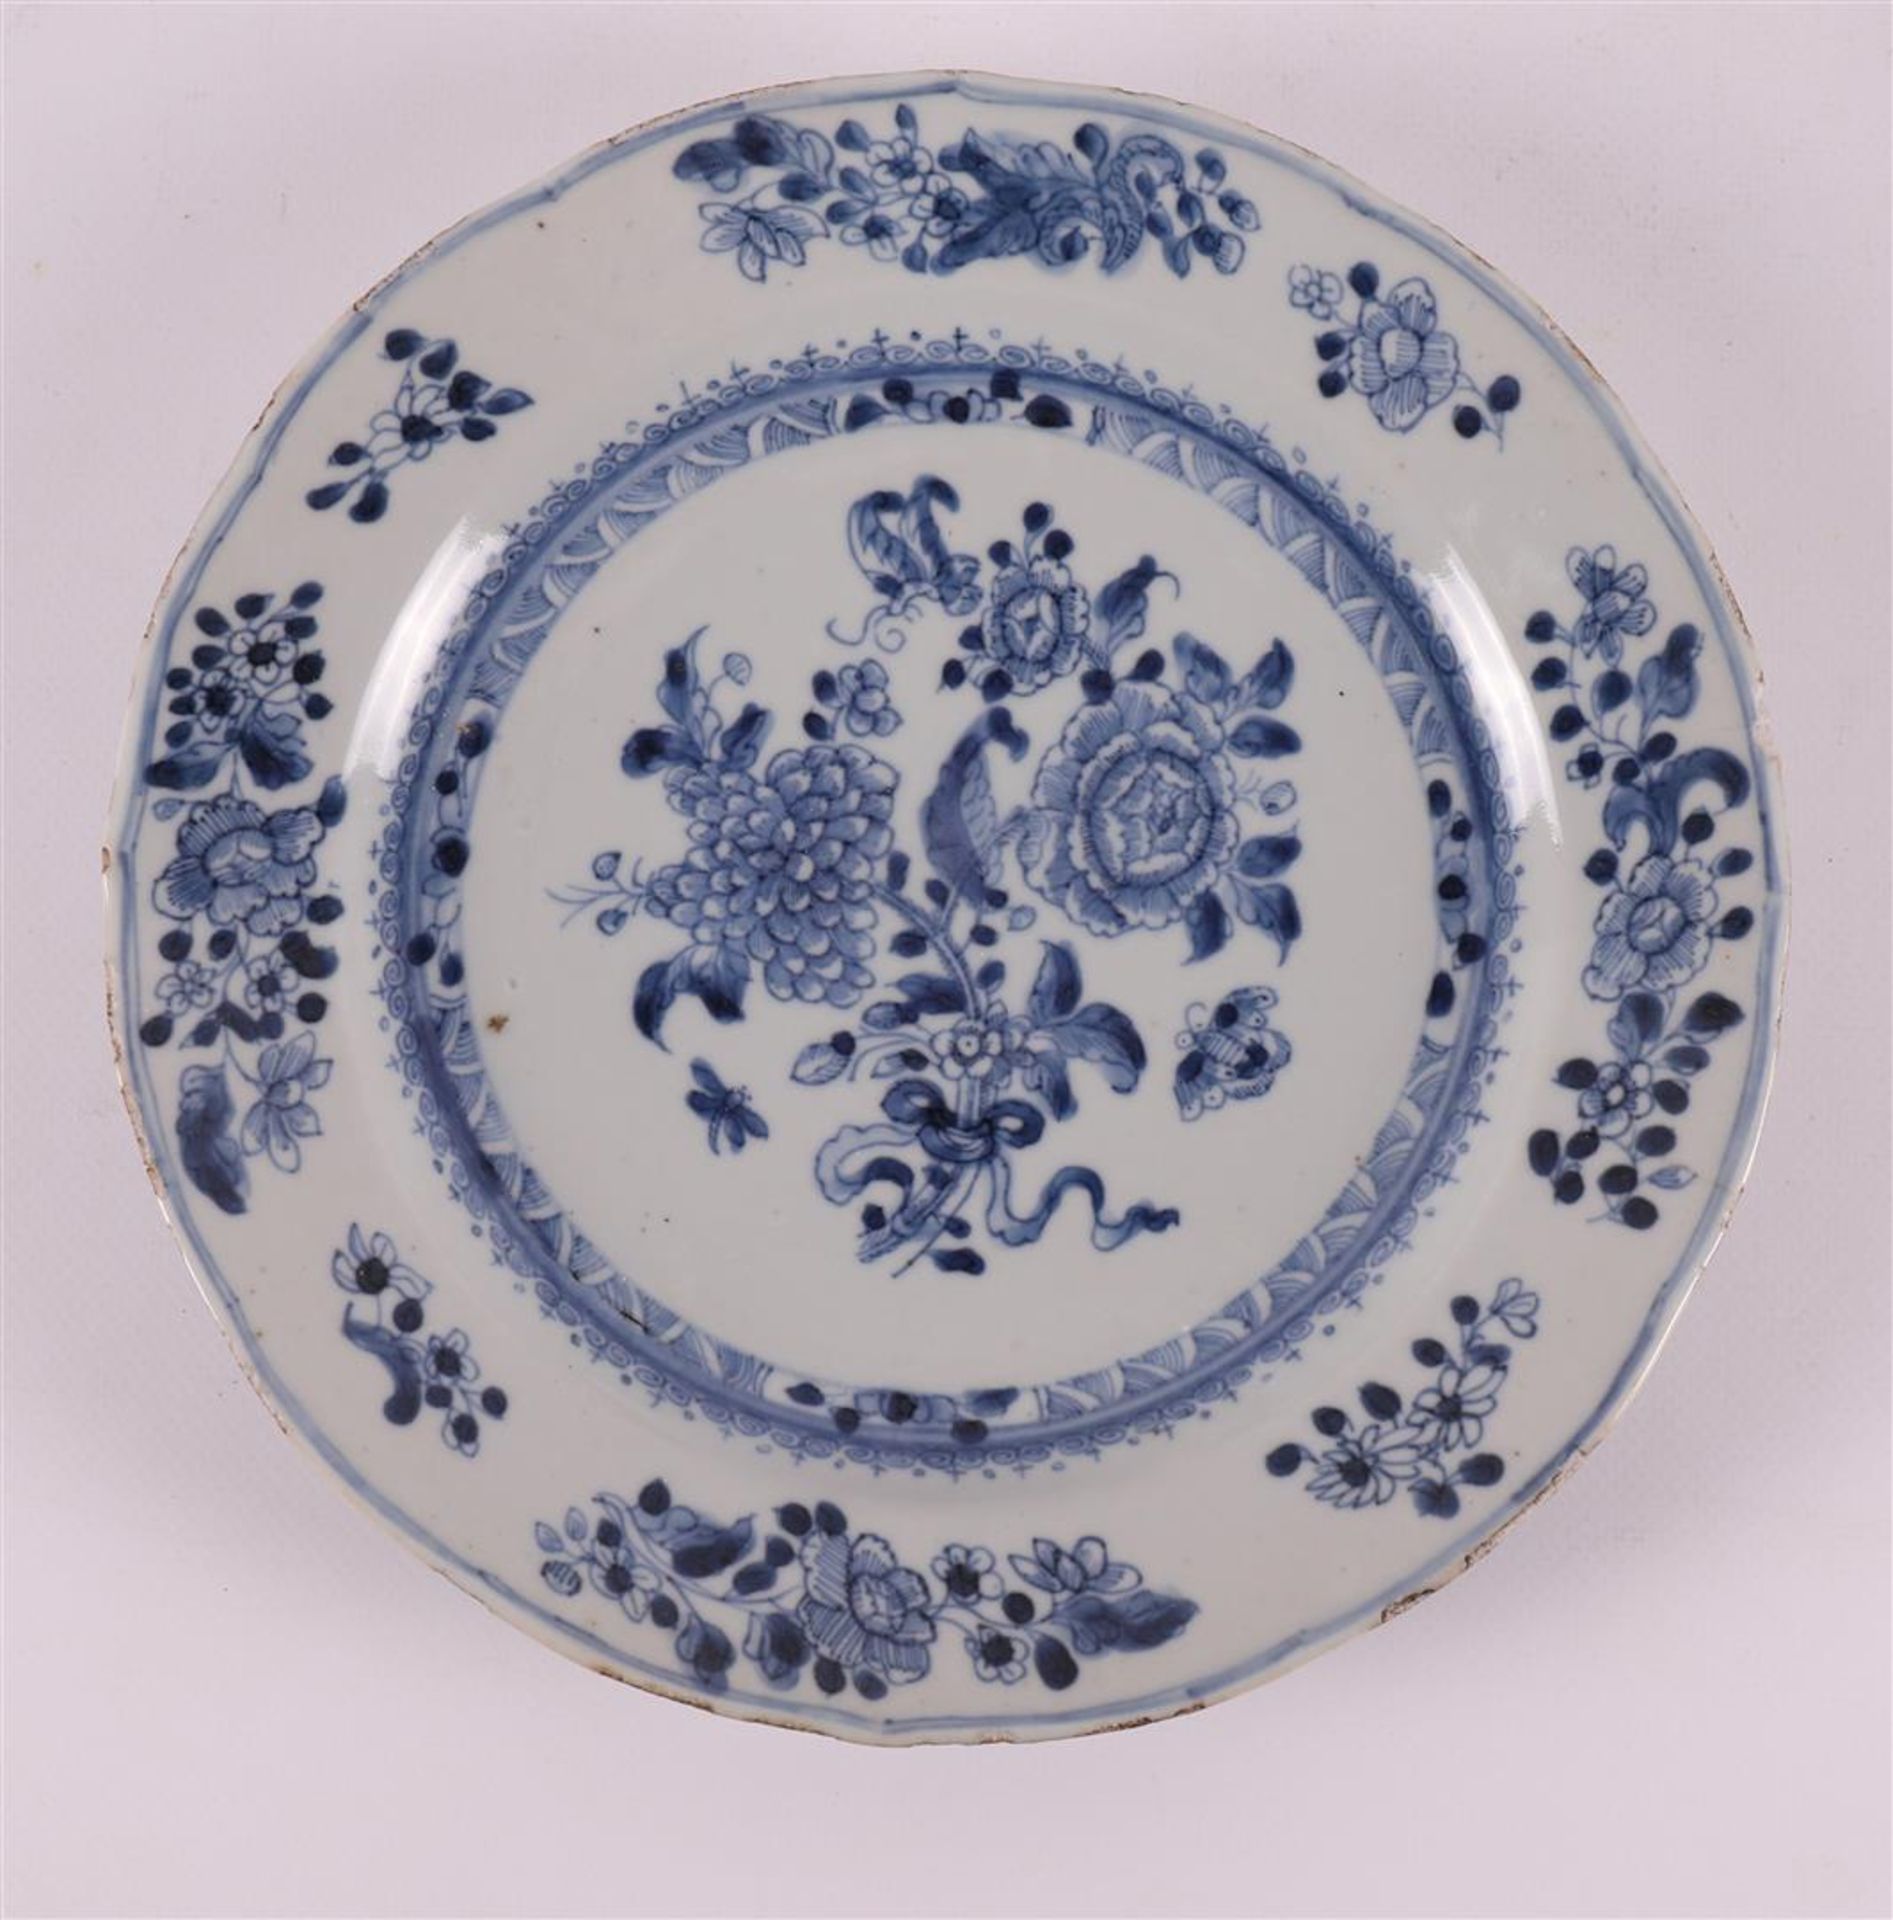 Three various blue/white porcelain plates, China, Qing Dynasty, around 1800. - Image 2 of 10